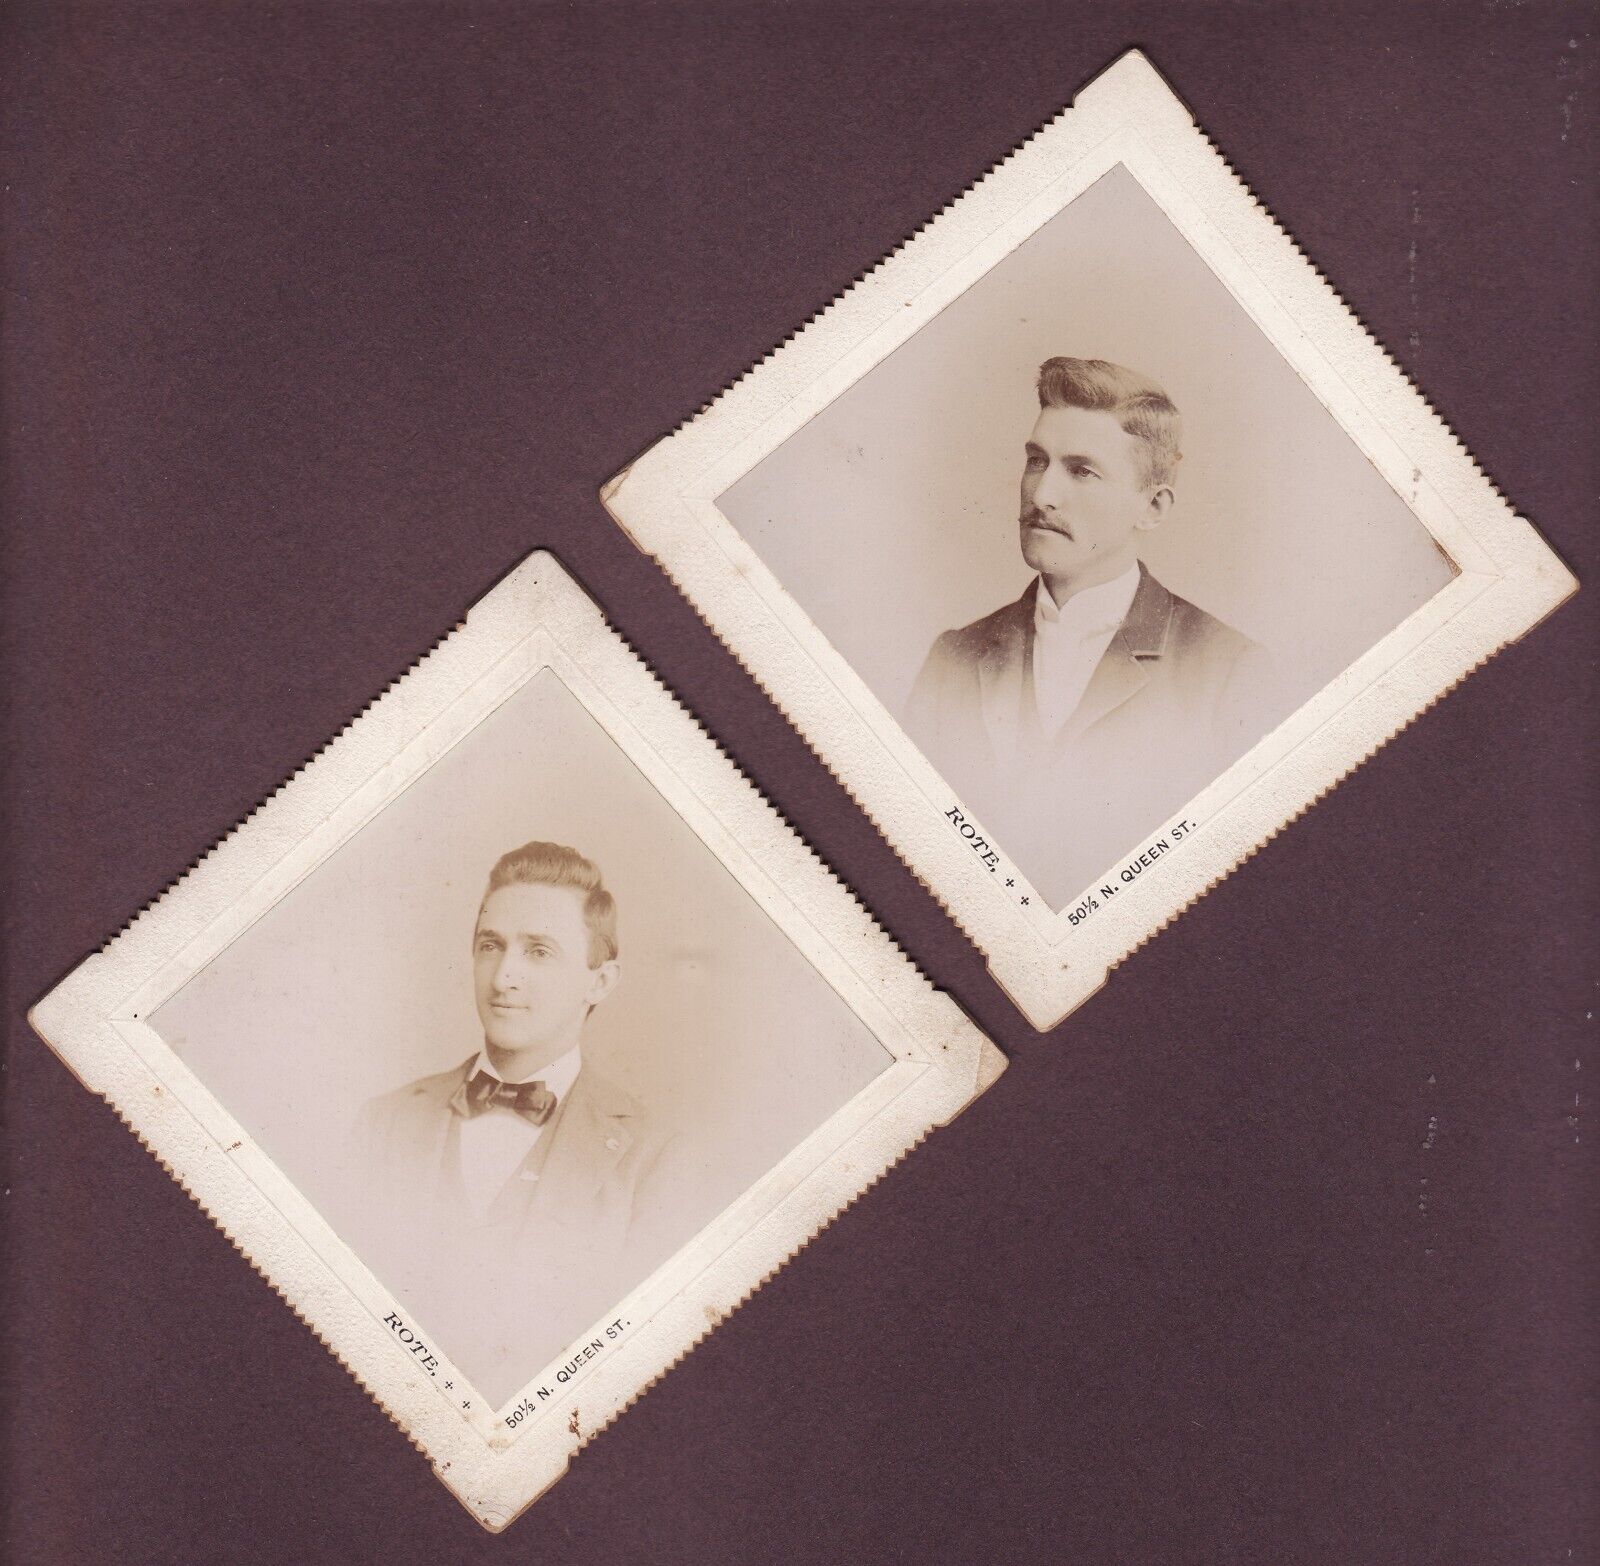 Antique Photo Studio Portraits - 2 Men, late 19th/early 20th cent.